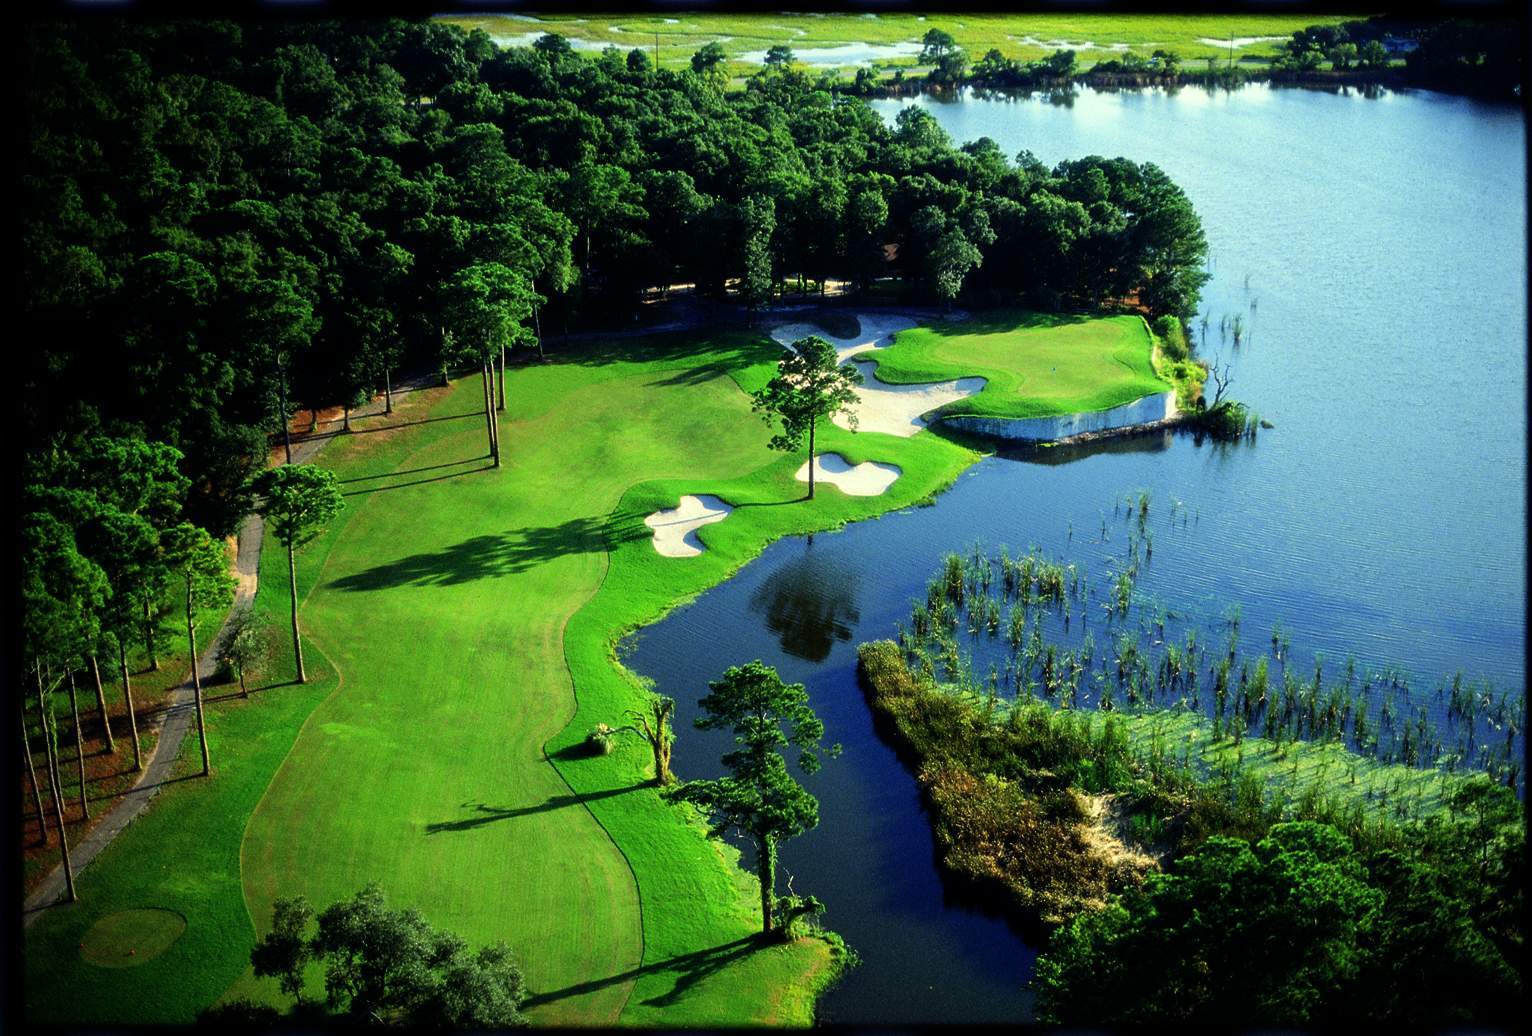 Golf Vacation Package - Legends ALL-INCLUSIVE Package Includes: FREE Golf, Lodging, Breakfast, Lunch, & Beers!